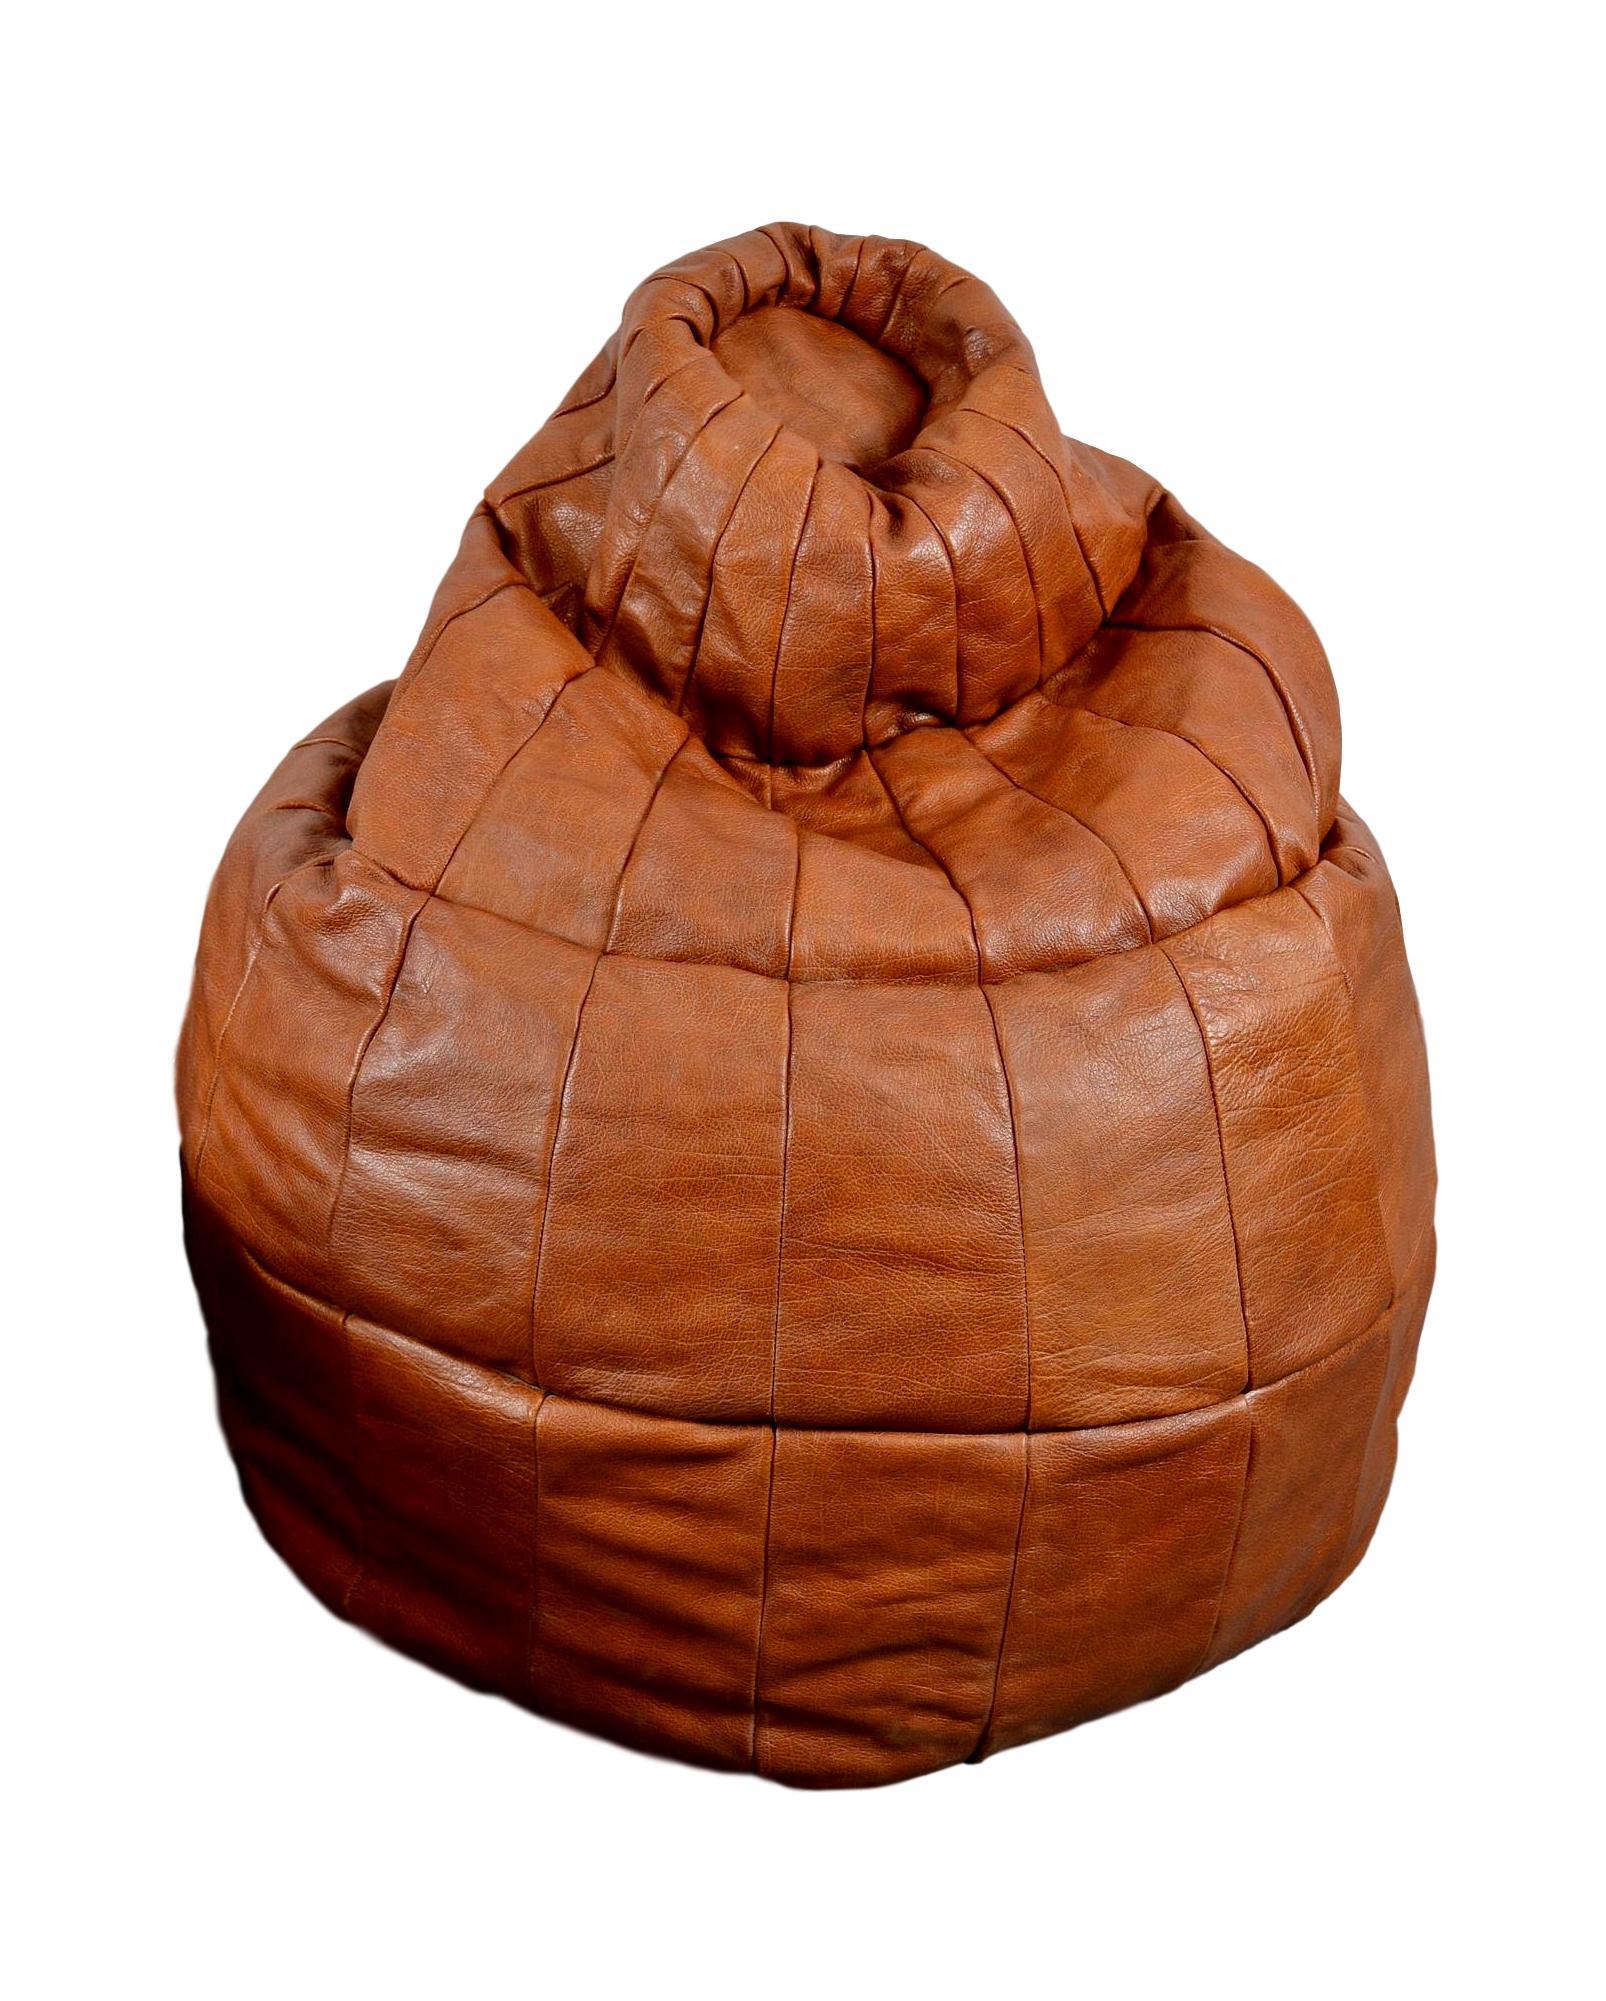 Gorgeous patchwork bean bag by De Sede in brown leather. Great coloring and patina to leather. Very good condition. Fun accent piece. 

20 additional leather De Sede poufs and a bean bag available in our other listings.


 